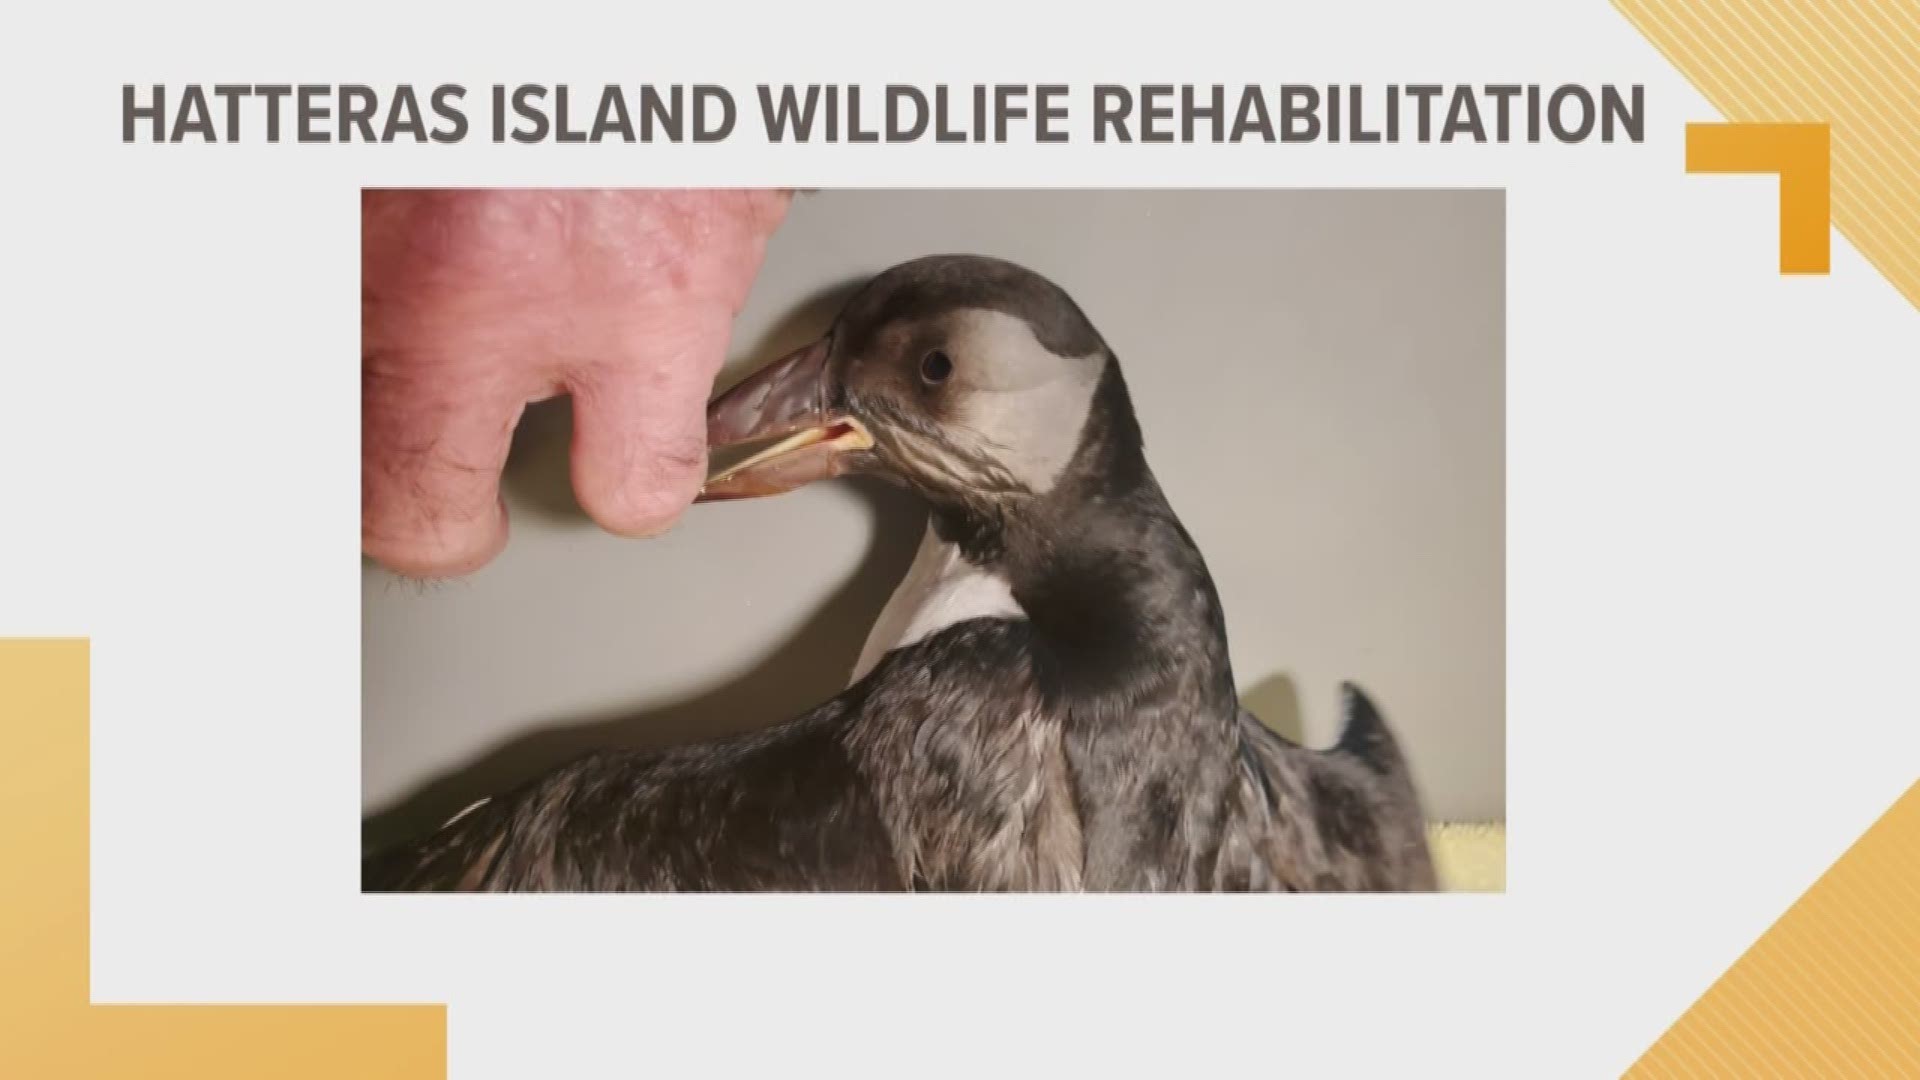 The Hatteras Island Wildlife Rehabilitation currently has an unusual patient in its care: a puffin!